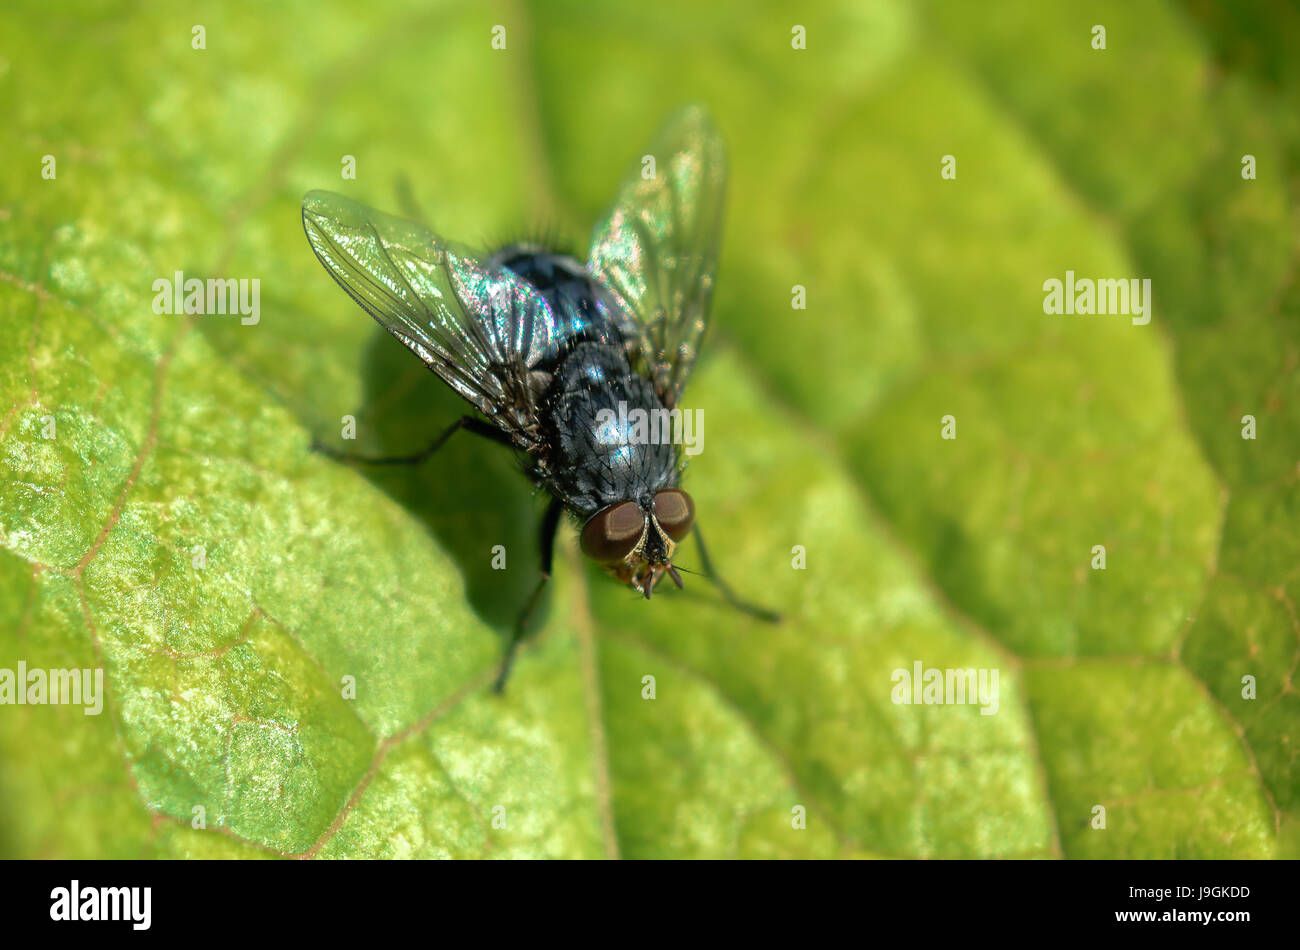 Bluebottle fly on leaf with green background Stock Photo